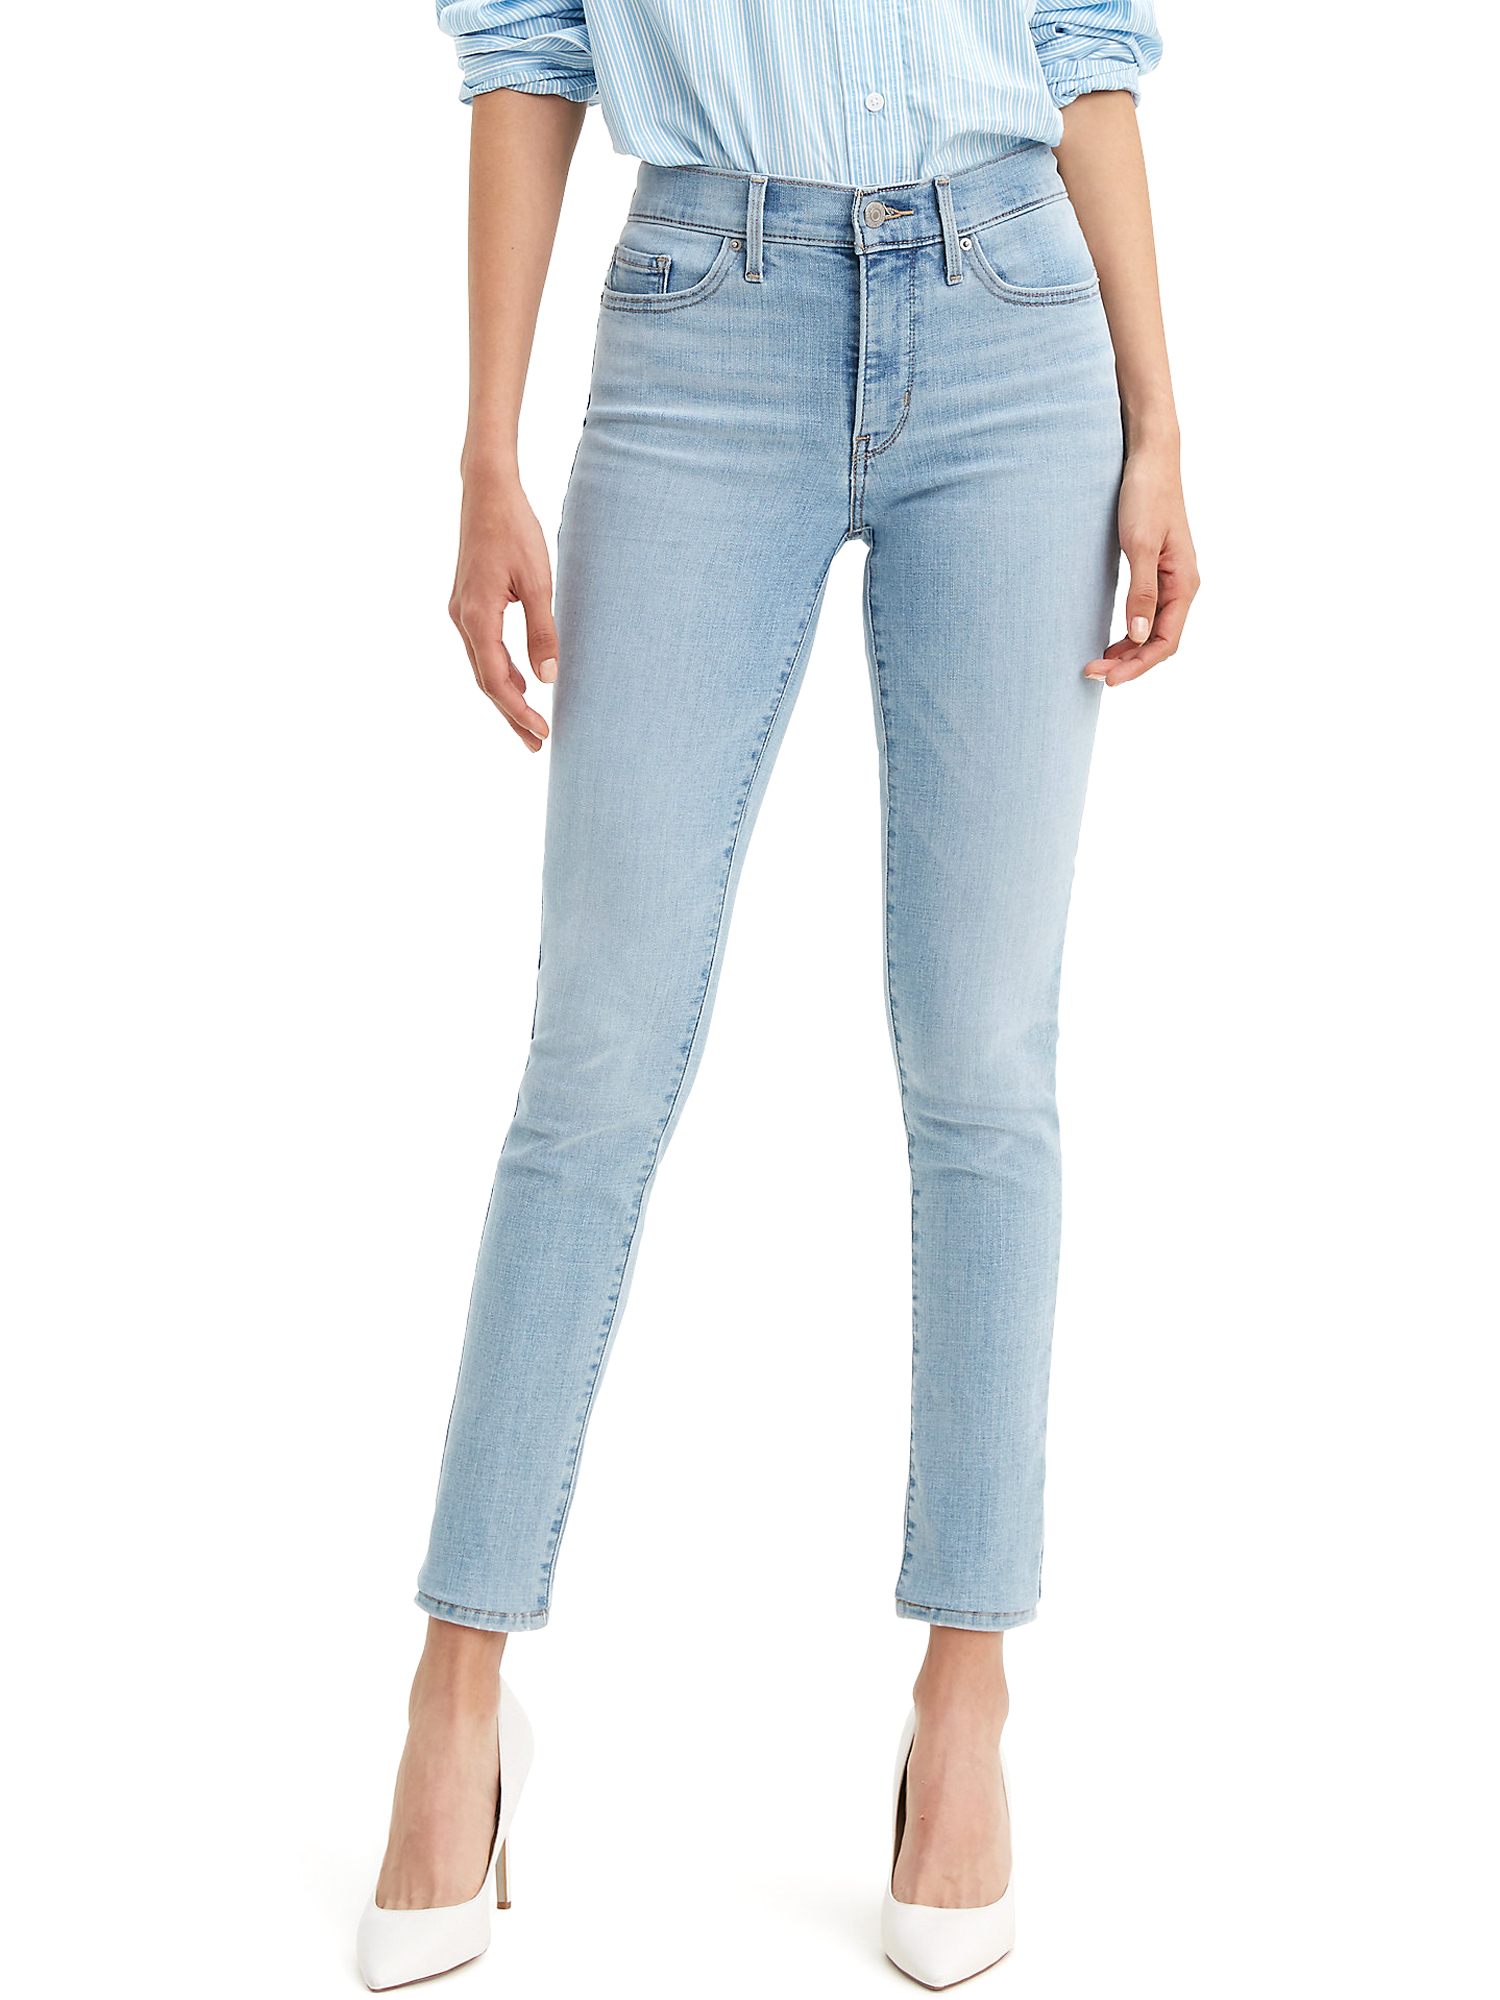 Levi’s Original Red Tab Women's 311 Shaping Skinny Jeans - image 1 of 6